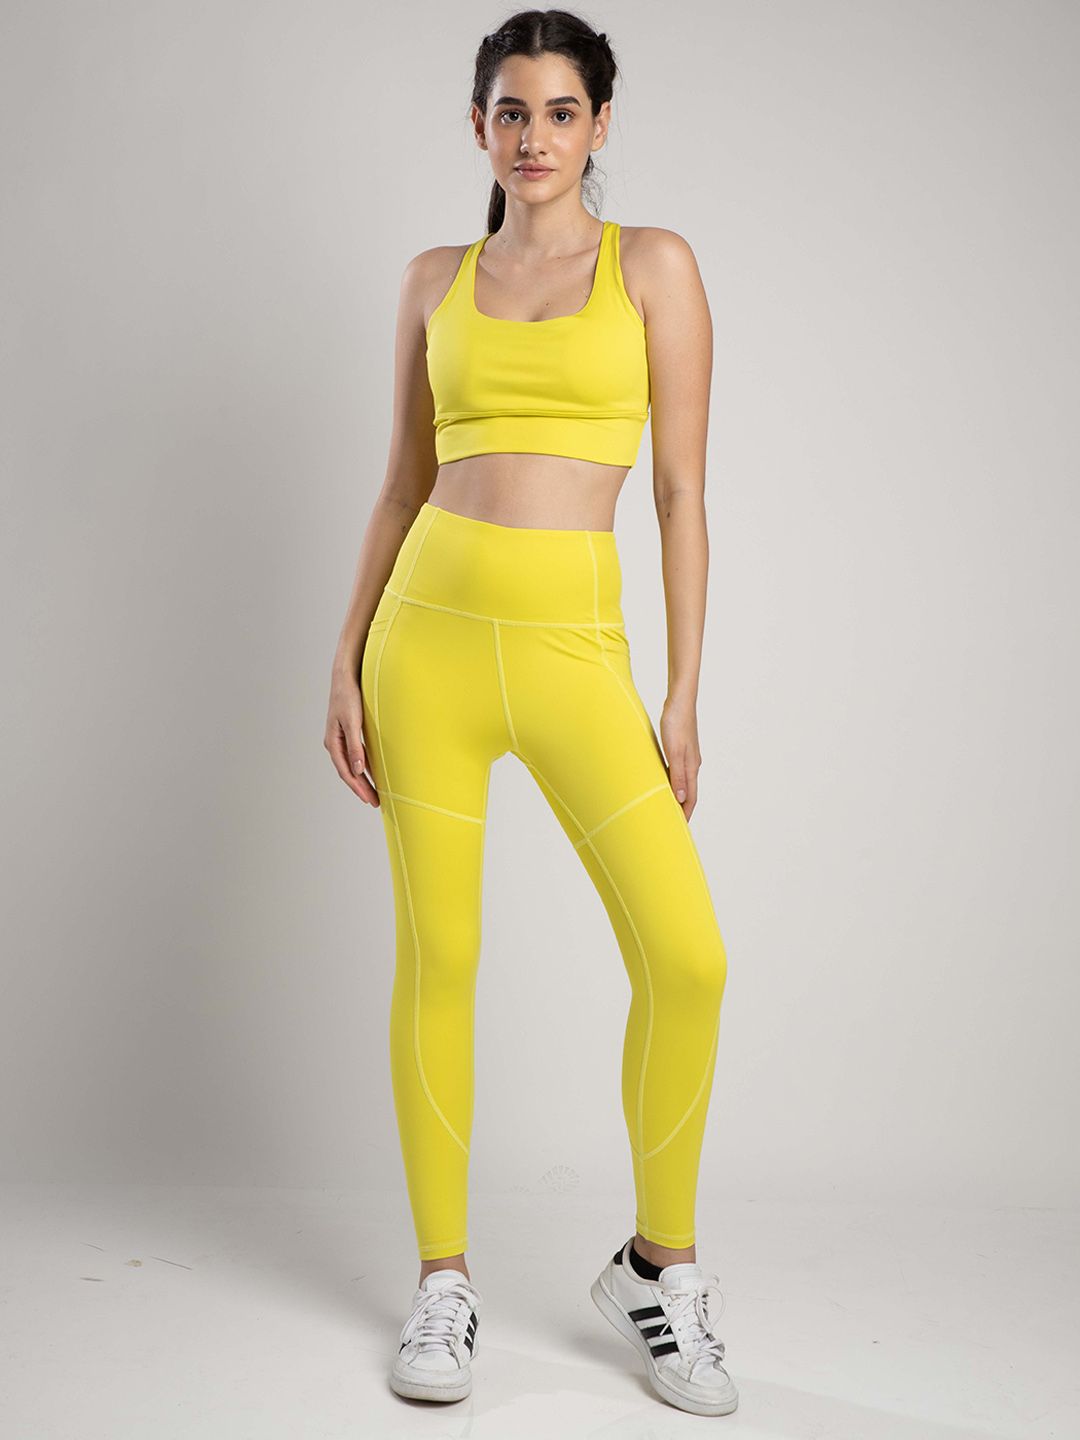 SKNZ Women Yellow Solid Antimicrobial Tights Price in India